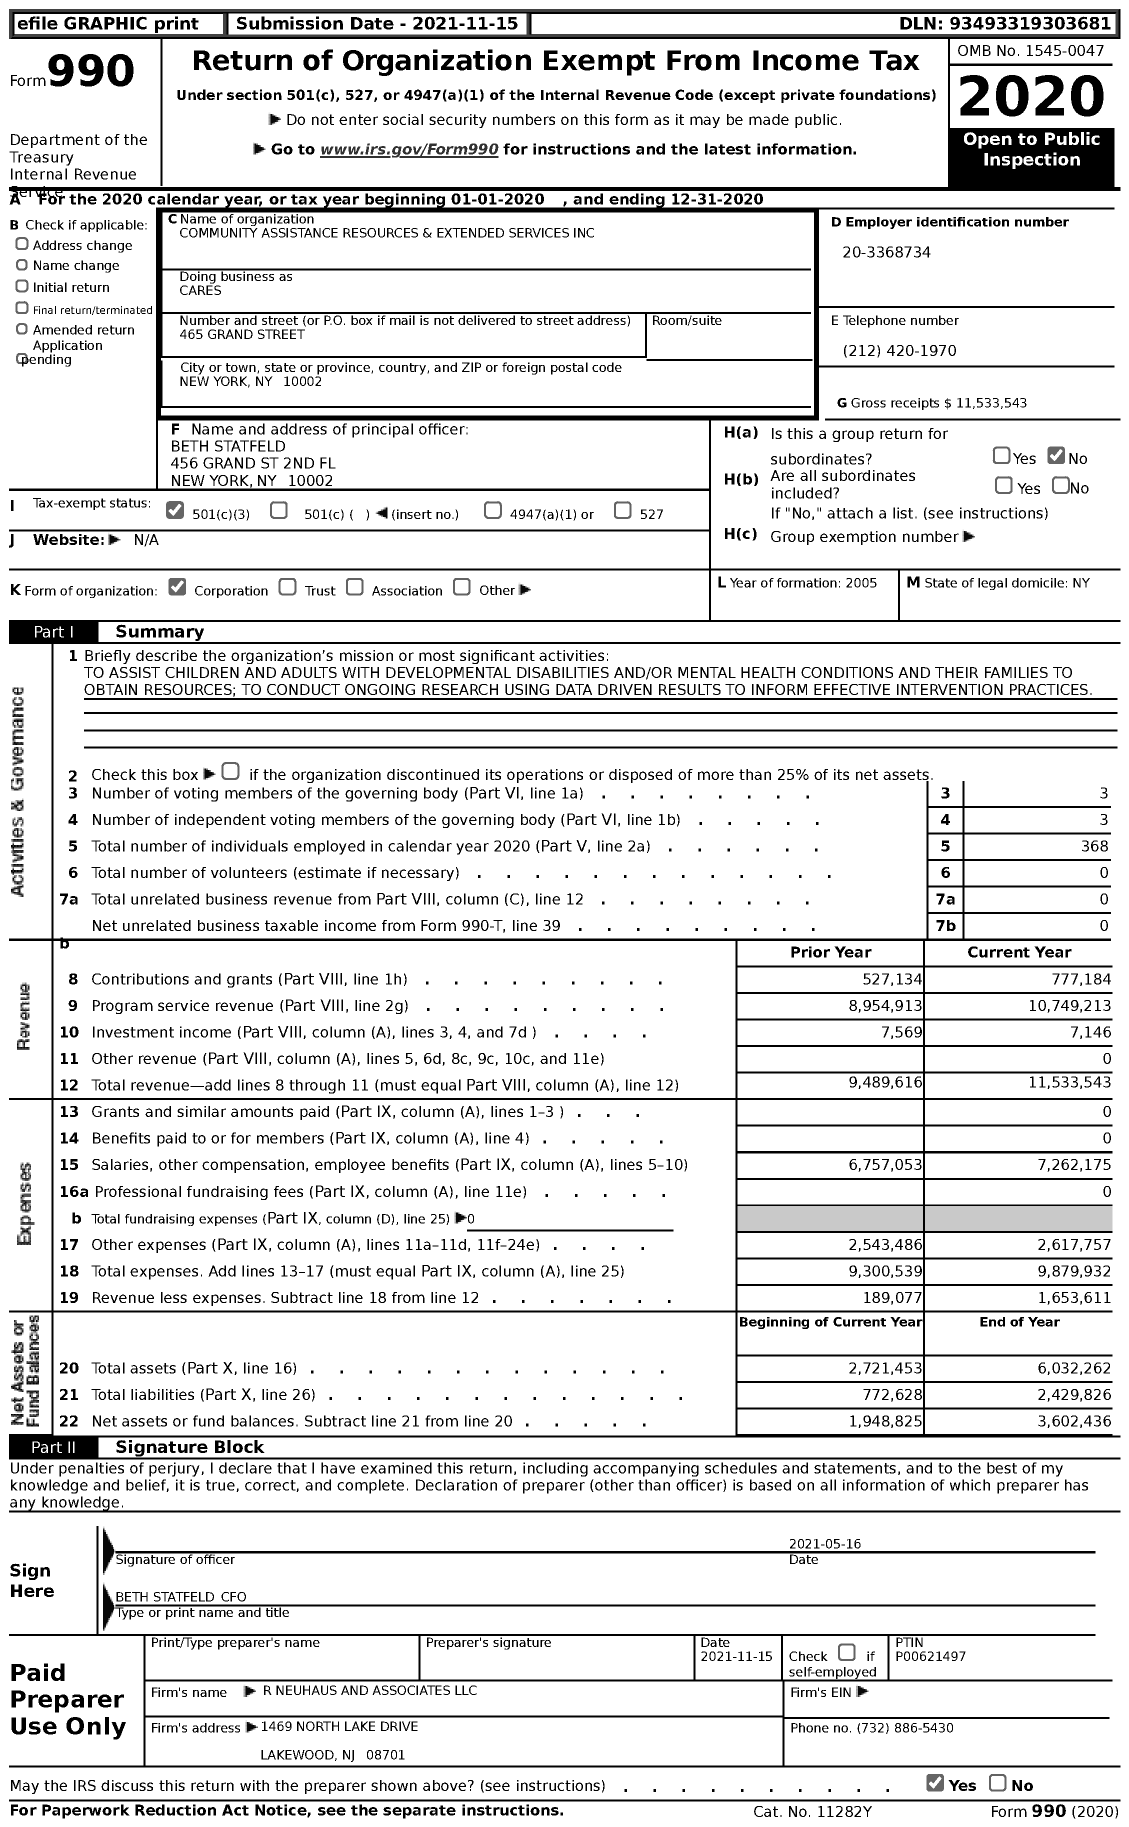 Image of first page of 2020 Form 990 for Community Assistance Resources and Extended Services (CARES)